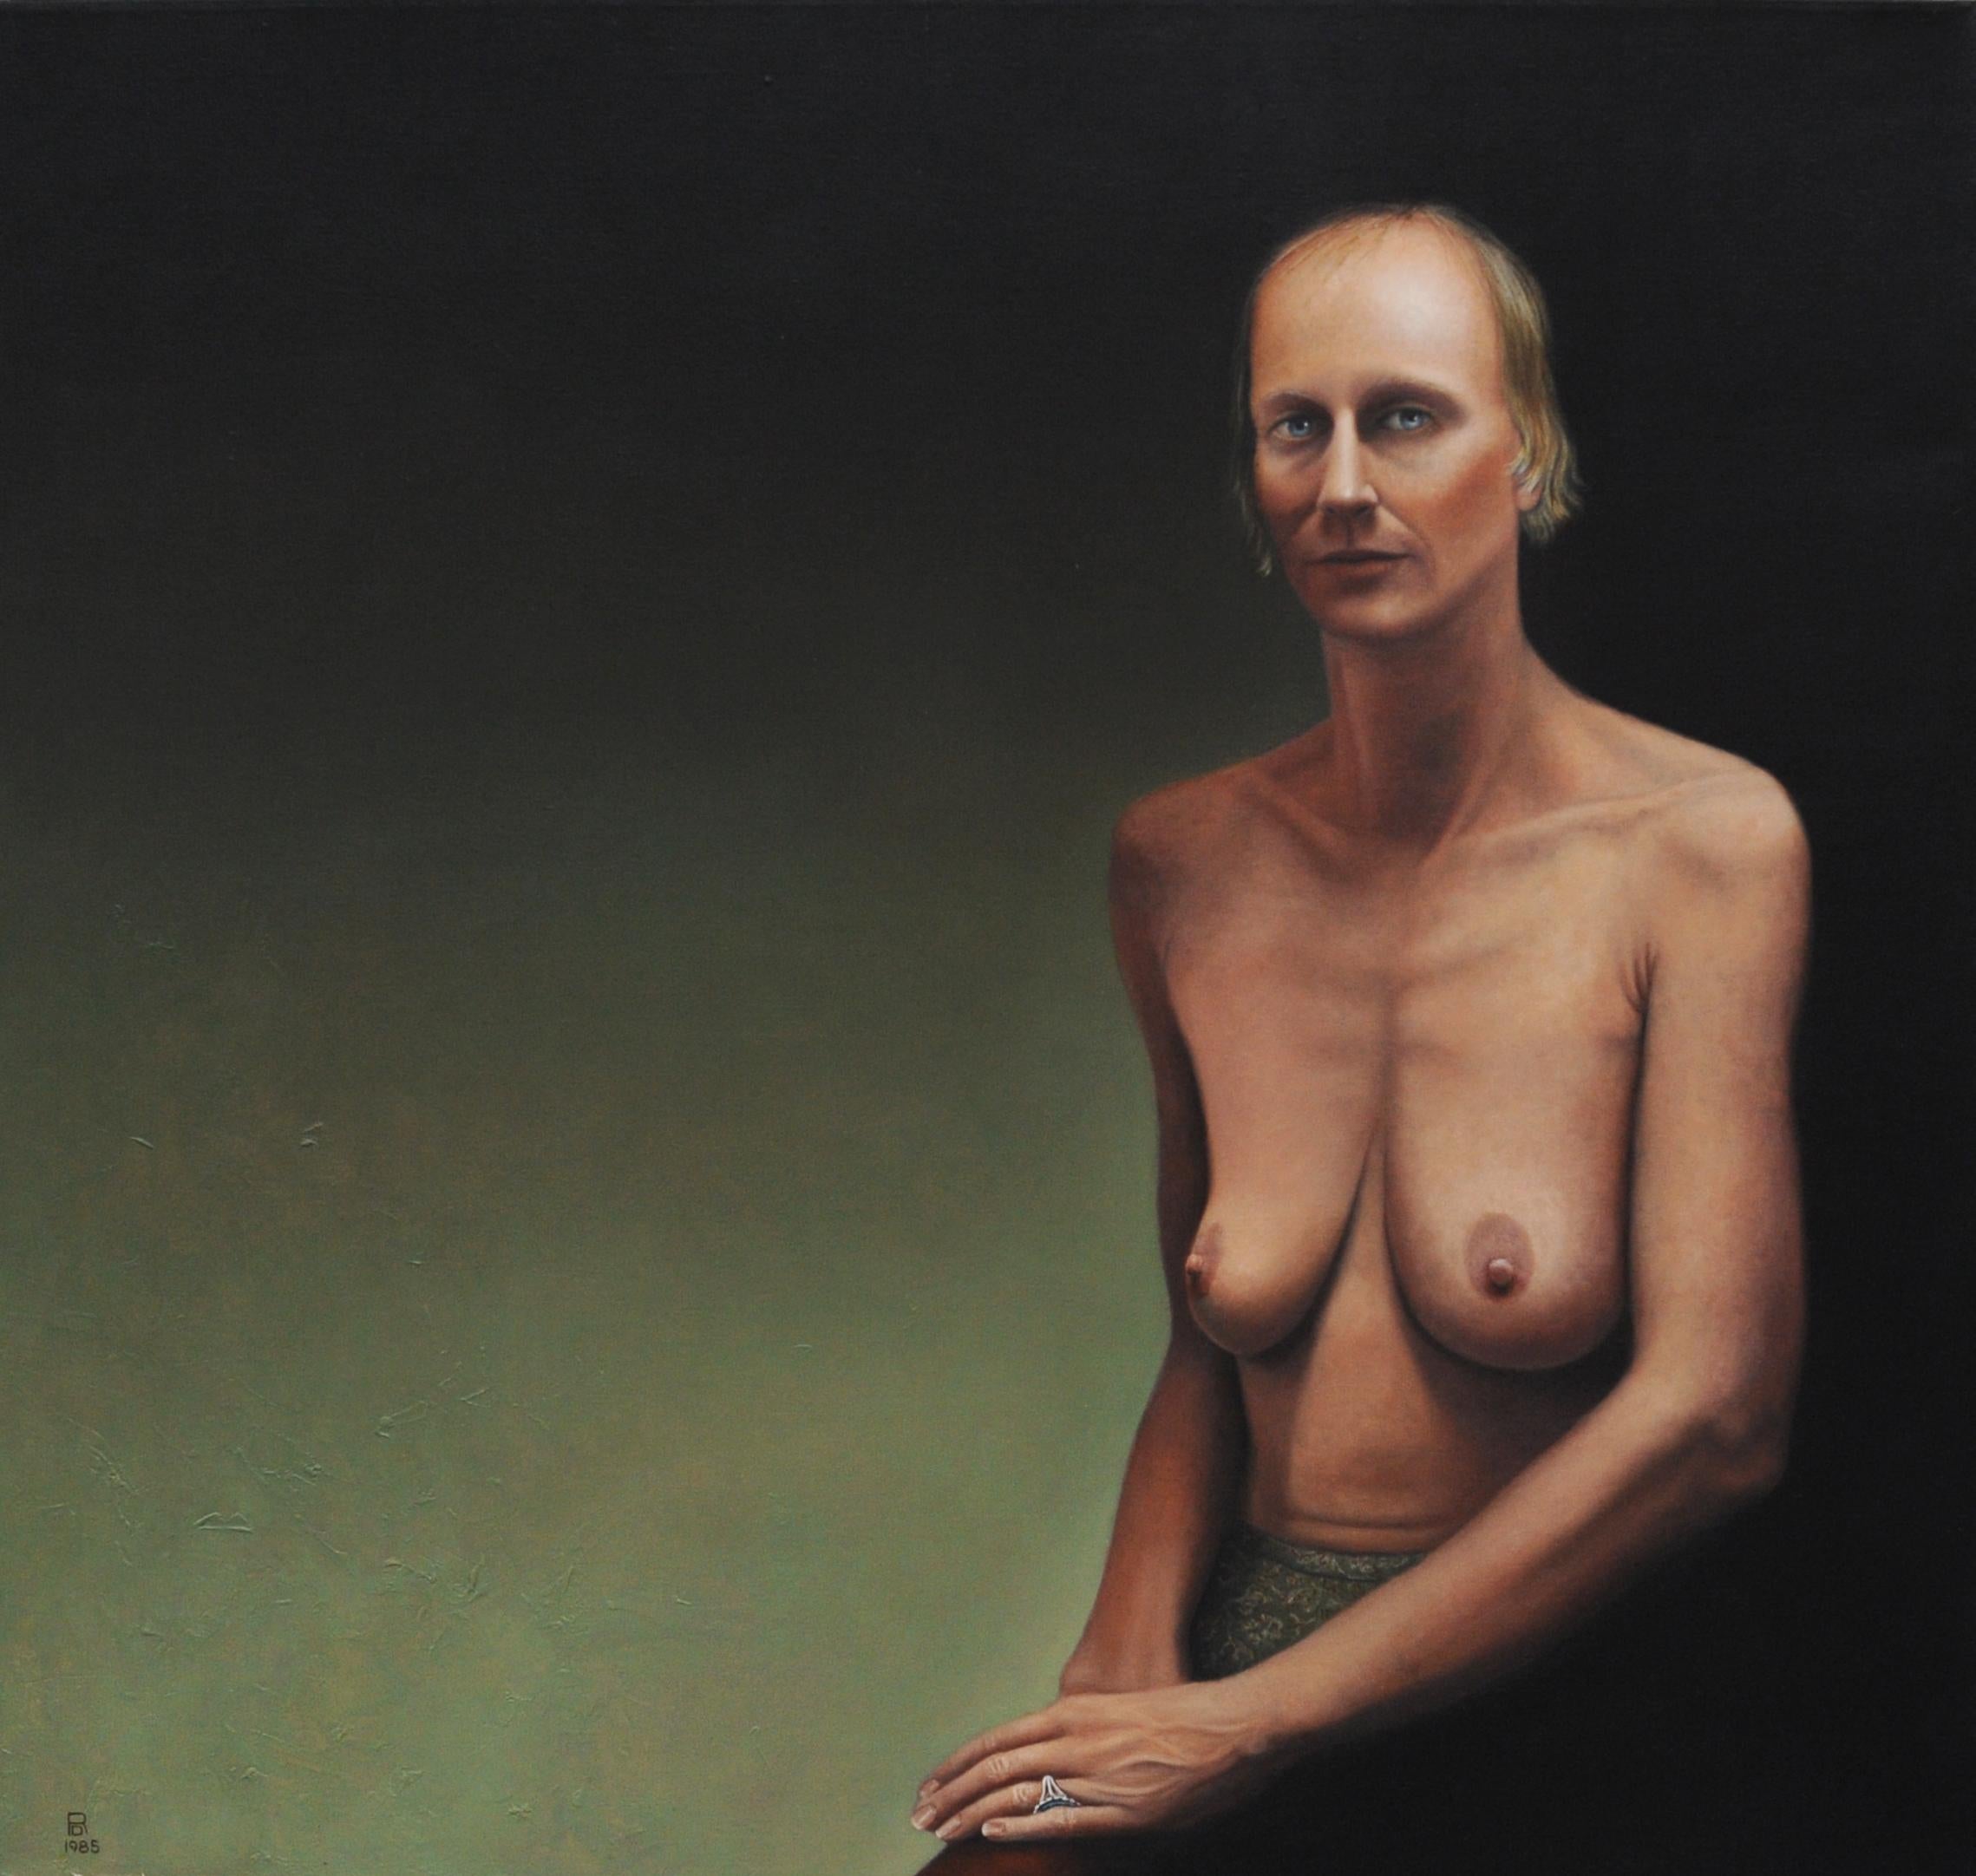 Rebecca Davenport (b. 1943) nude portrait. Painting is oil on canvas. Signed with artist's monogram, dated 1985 in lower left corner.

Rebecca Davenport paintings are in many private and public collections, including the National Museum of